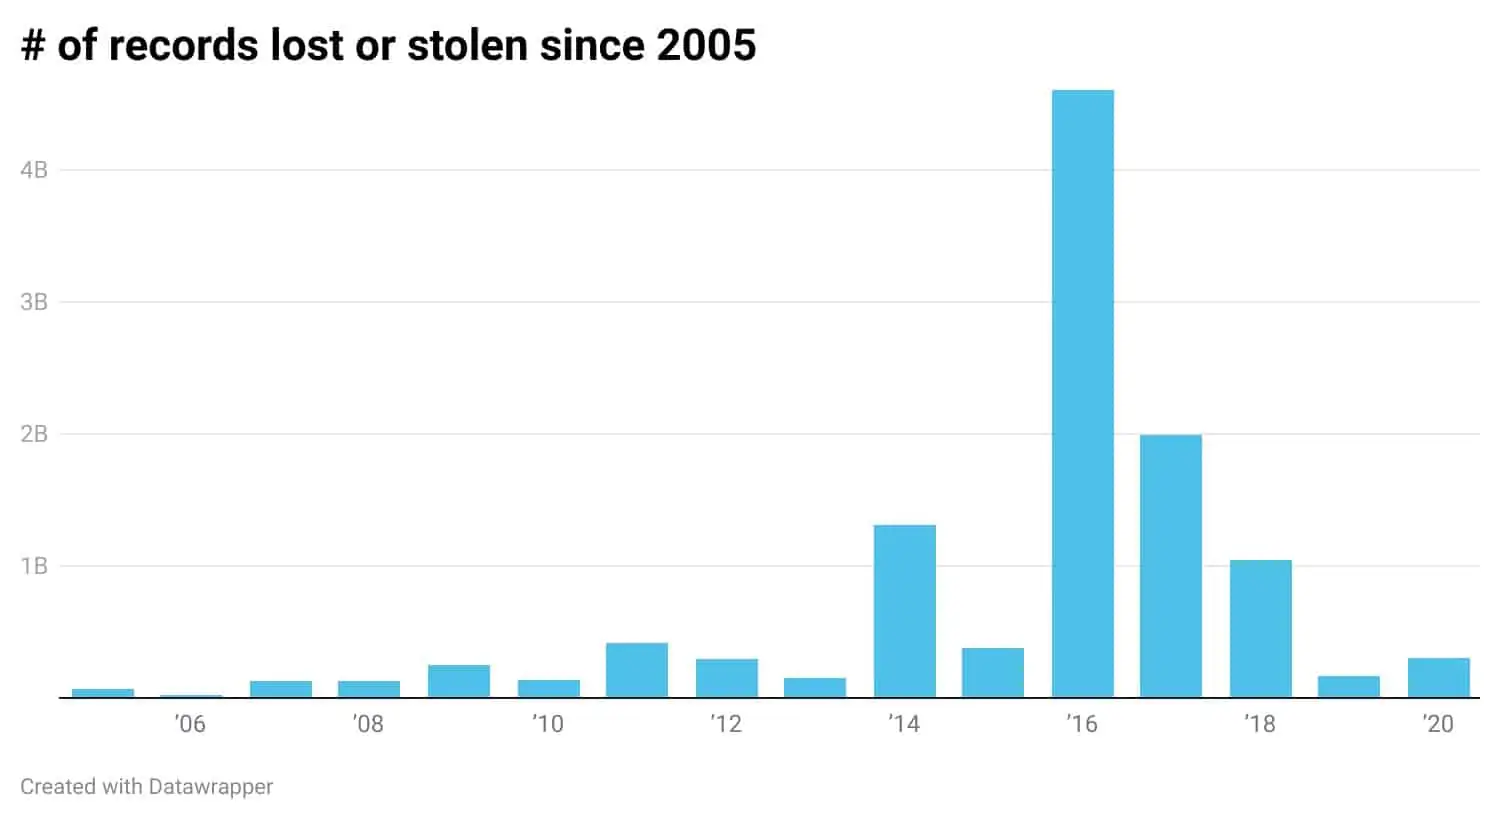 Number of records impacted by data breaches from 2005